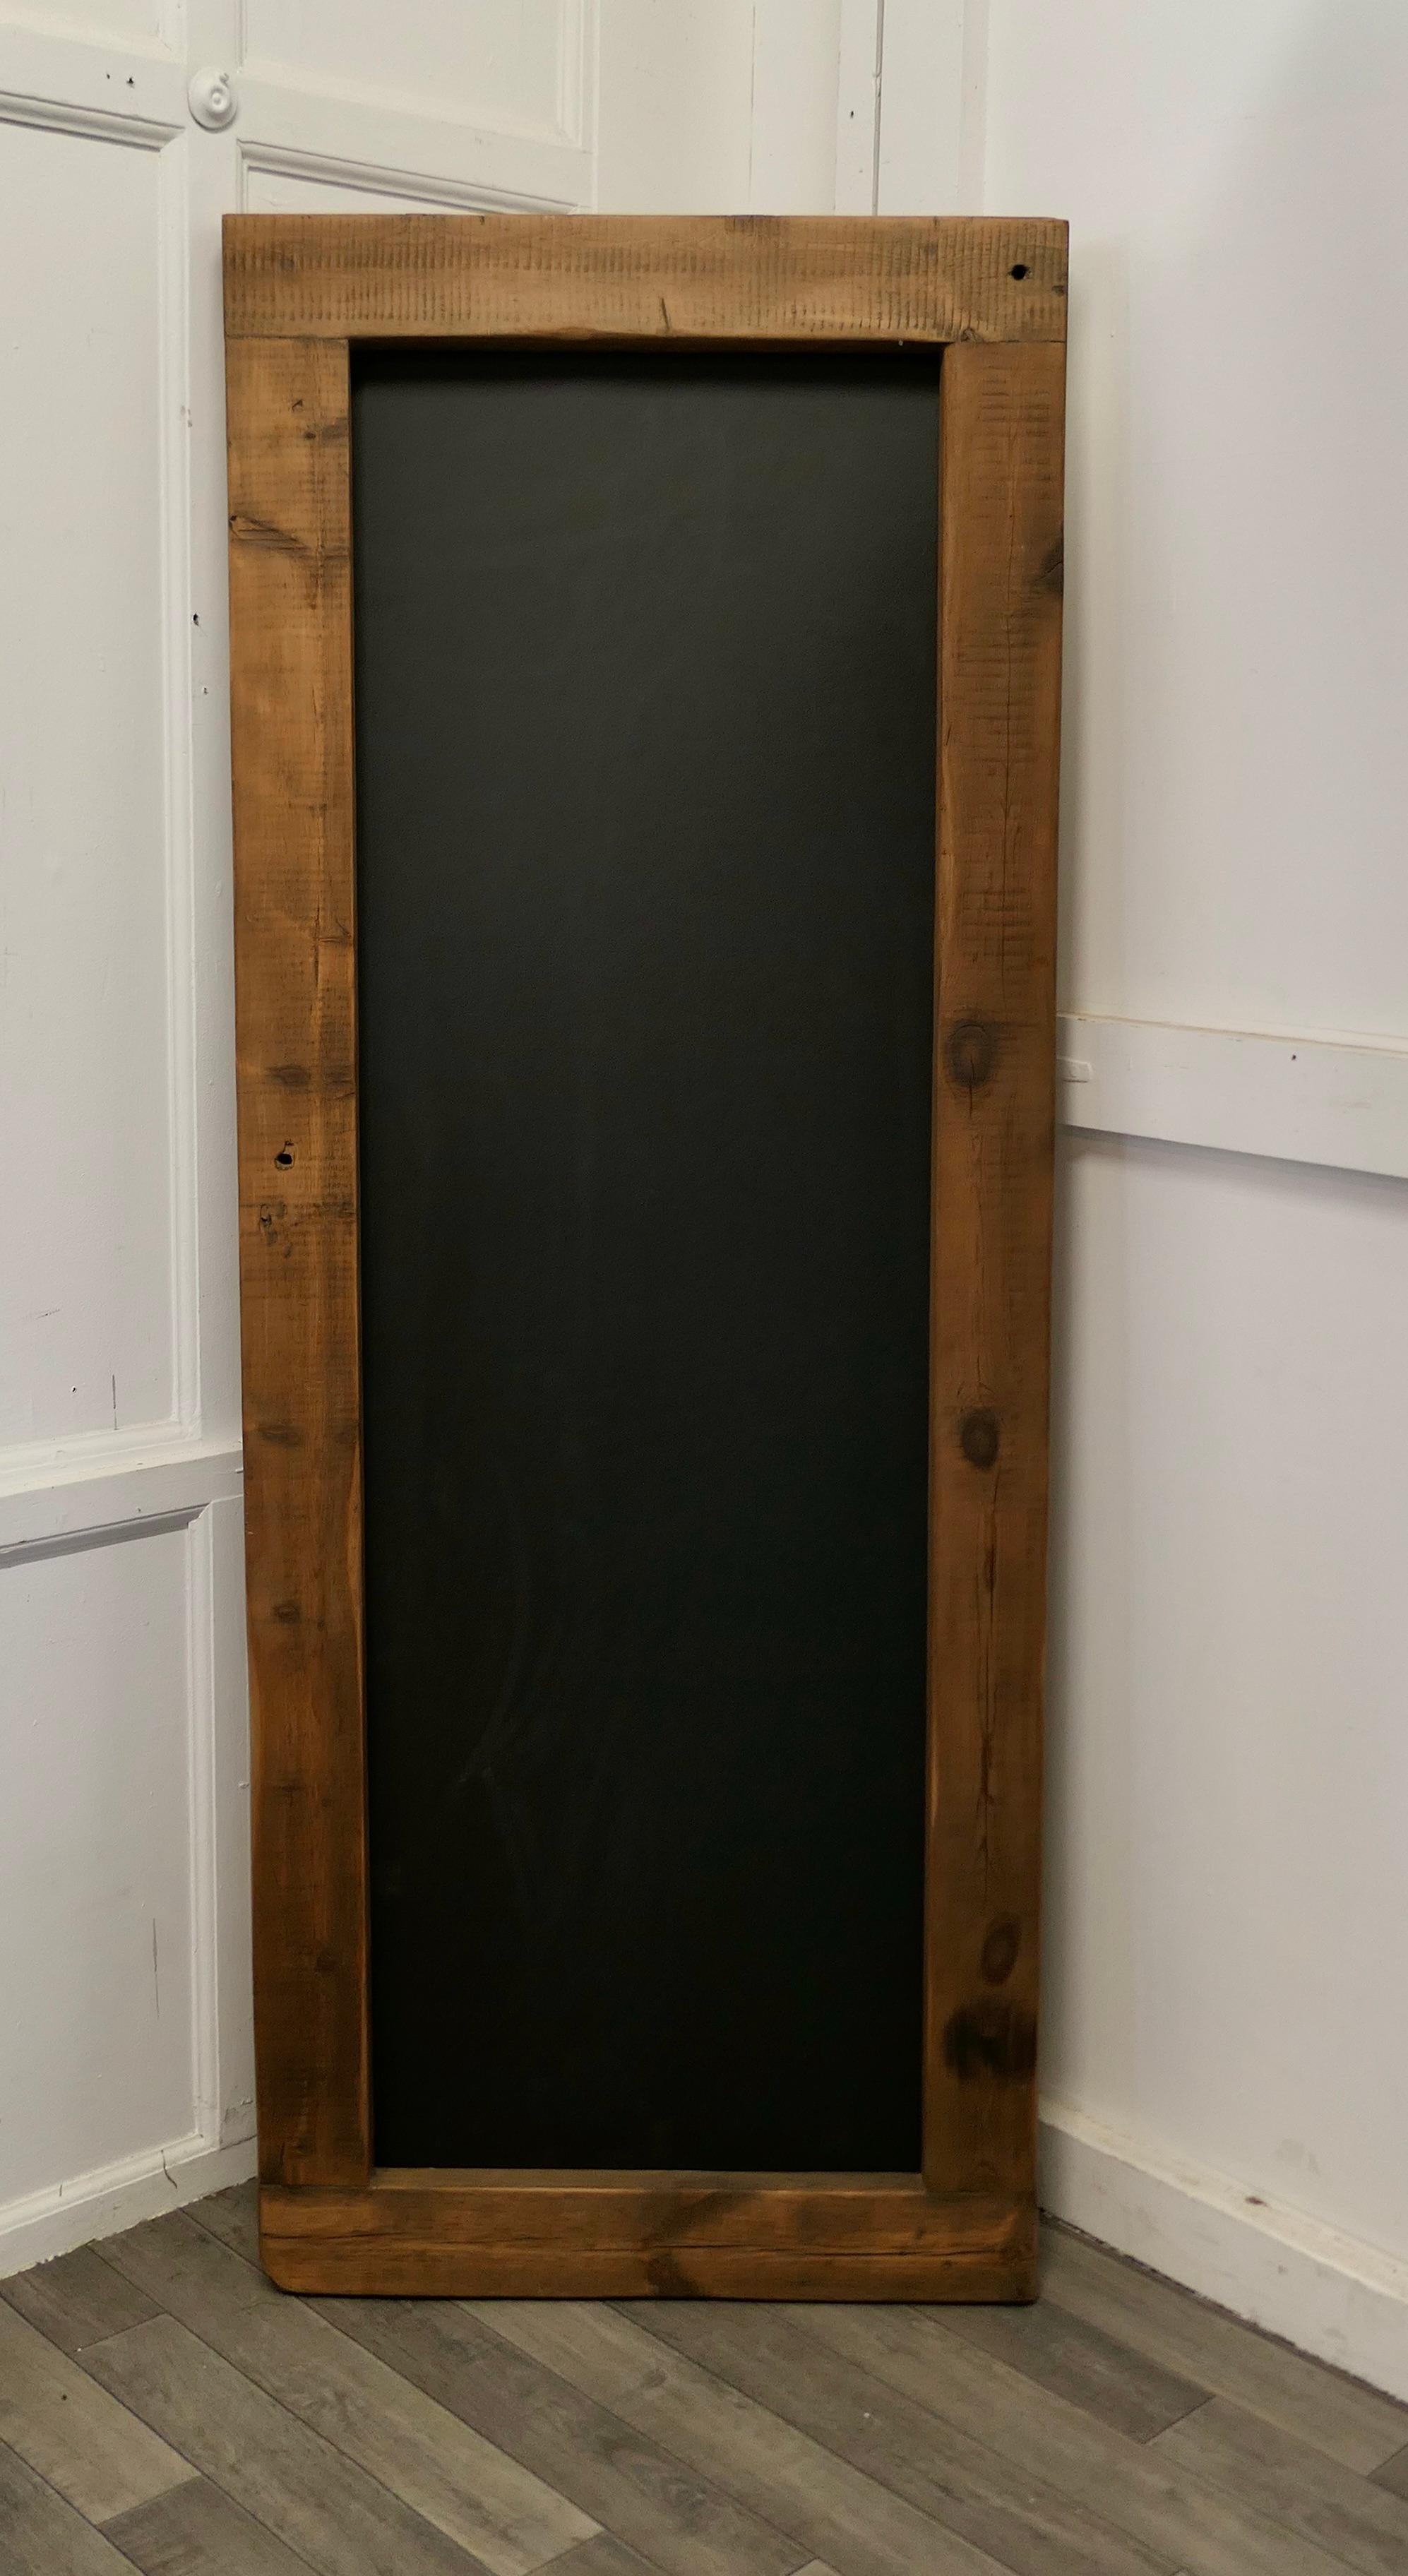 Recycled pine wine bar menu, black board 

A good handsome piece simply made with 4” old pine and waxed and polished

The attractively bordered board is ready to write or paint your menu or specials straight on

The wood is old and reclaimed